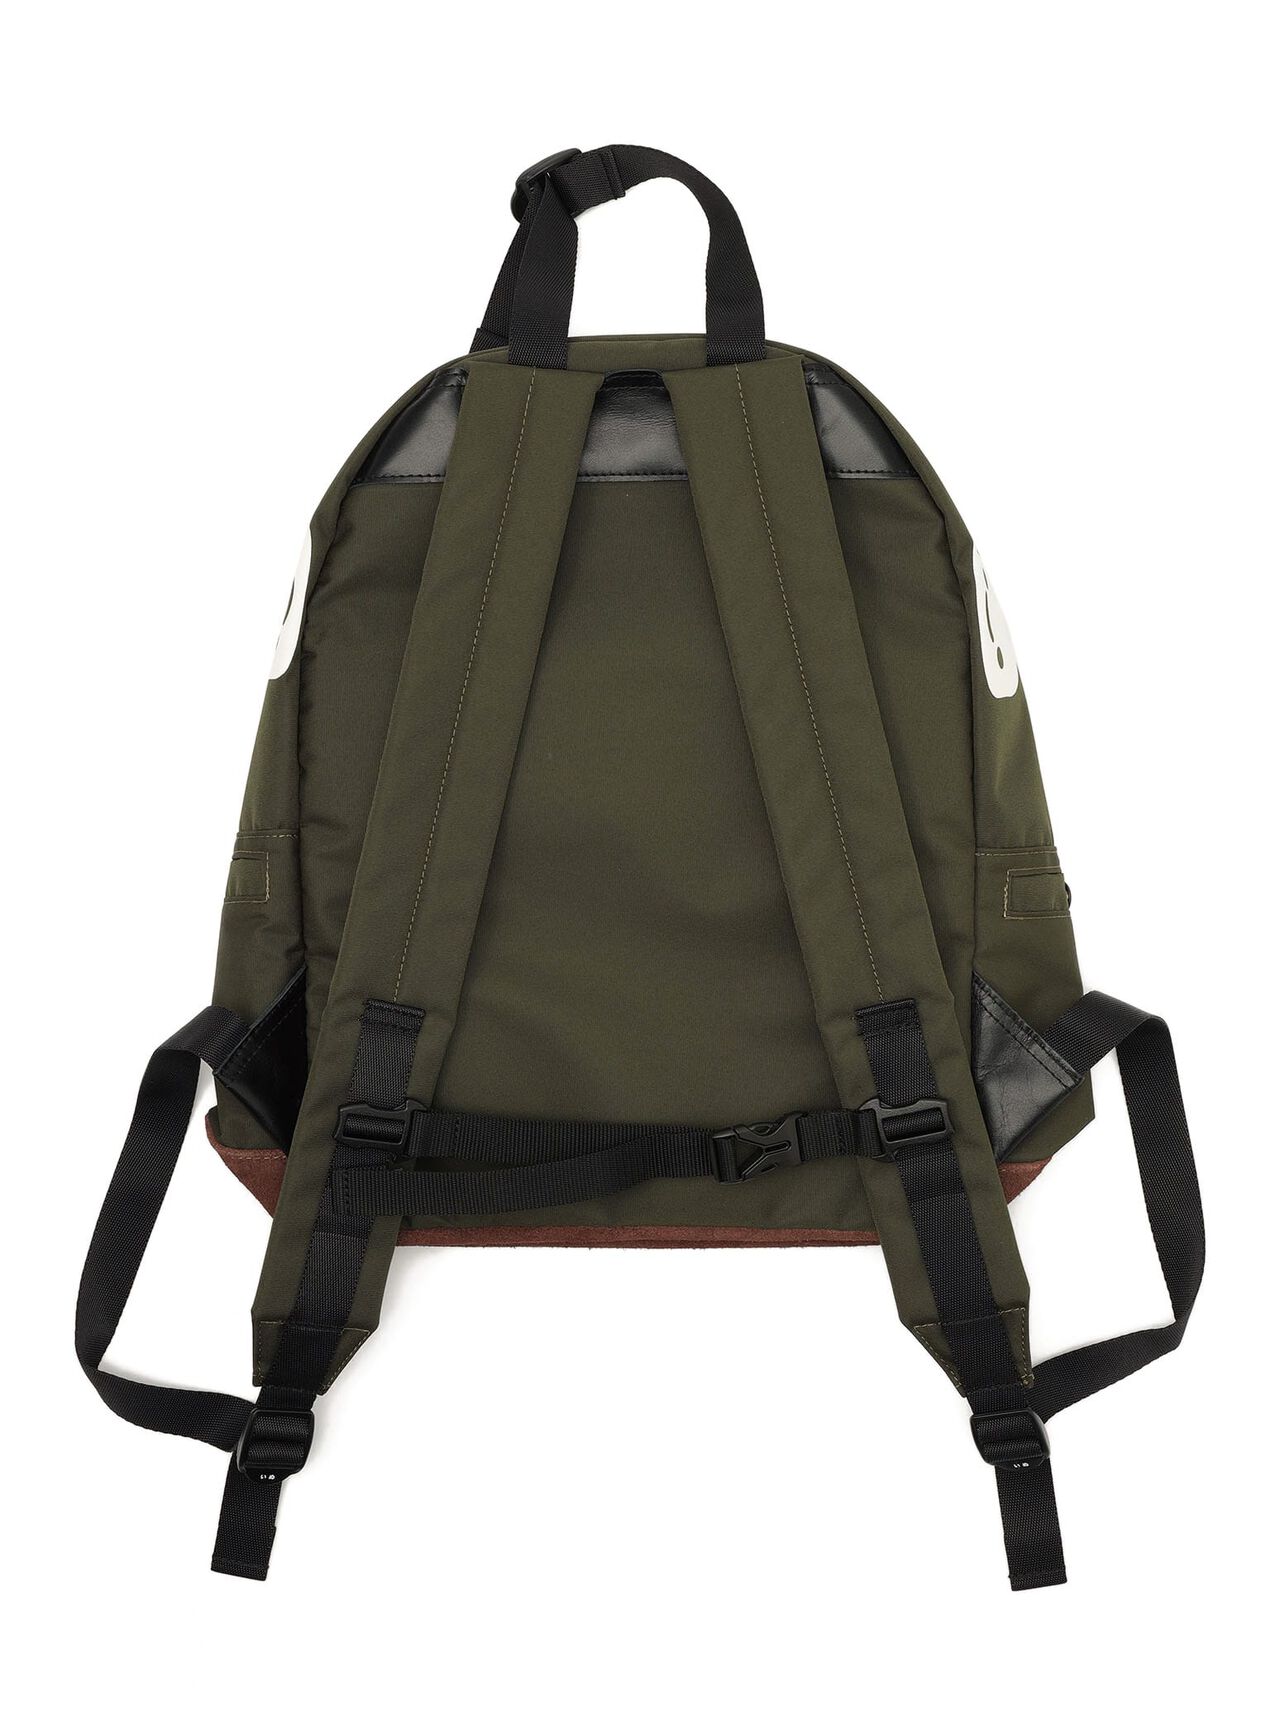 CUNE backpack in Cordura R with leather bottom M,ONE, large image number 8